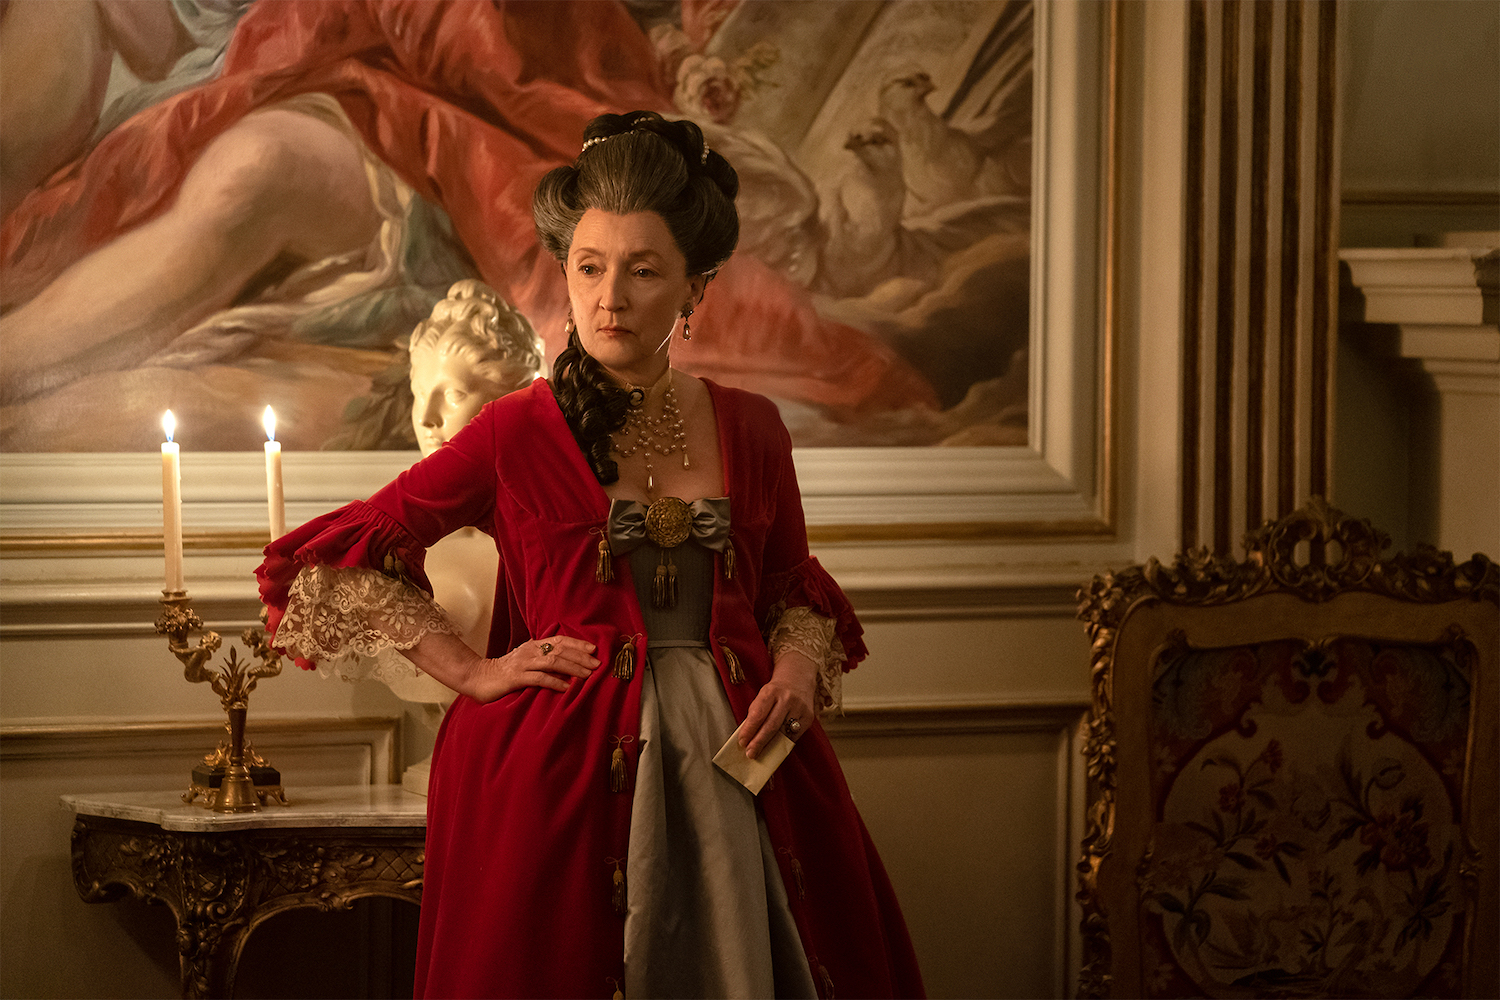 Picture shows: Genevieve de Merteuil (Lesley Manville) dressed in a red gown and holding a letter, stands in front of a painting in her opulent house.